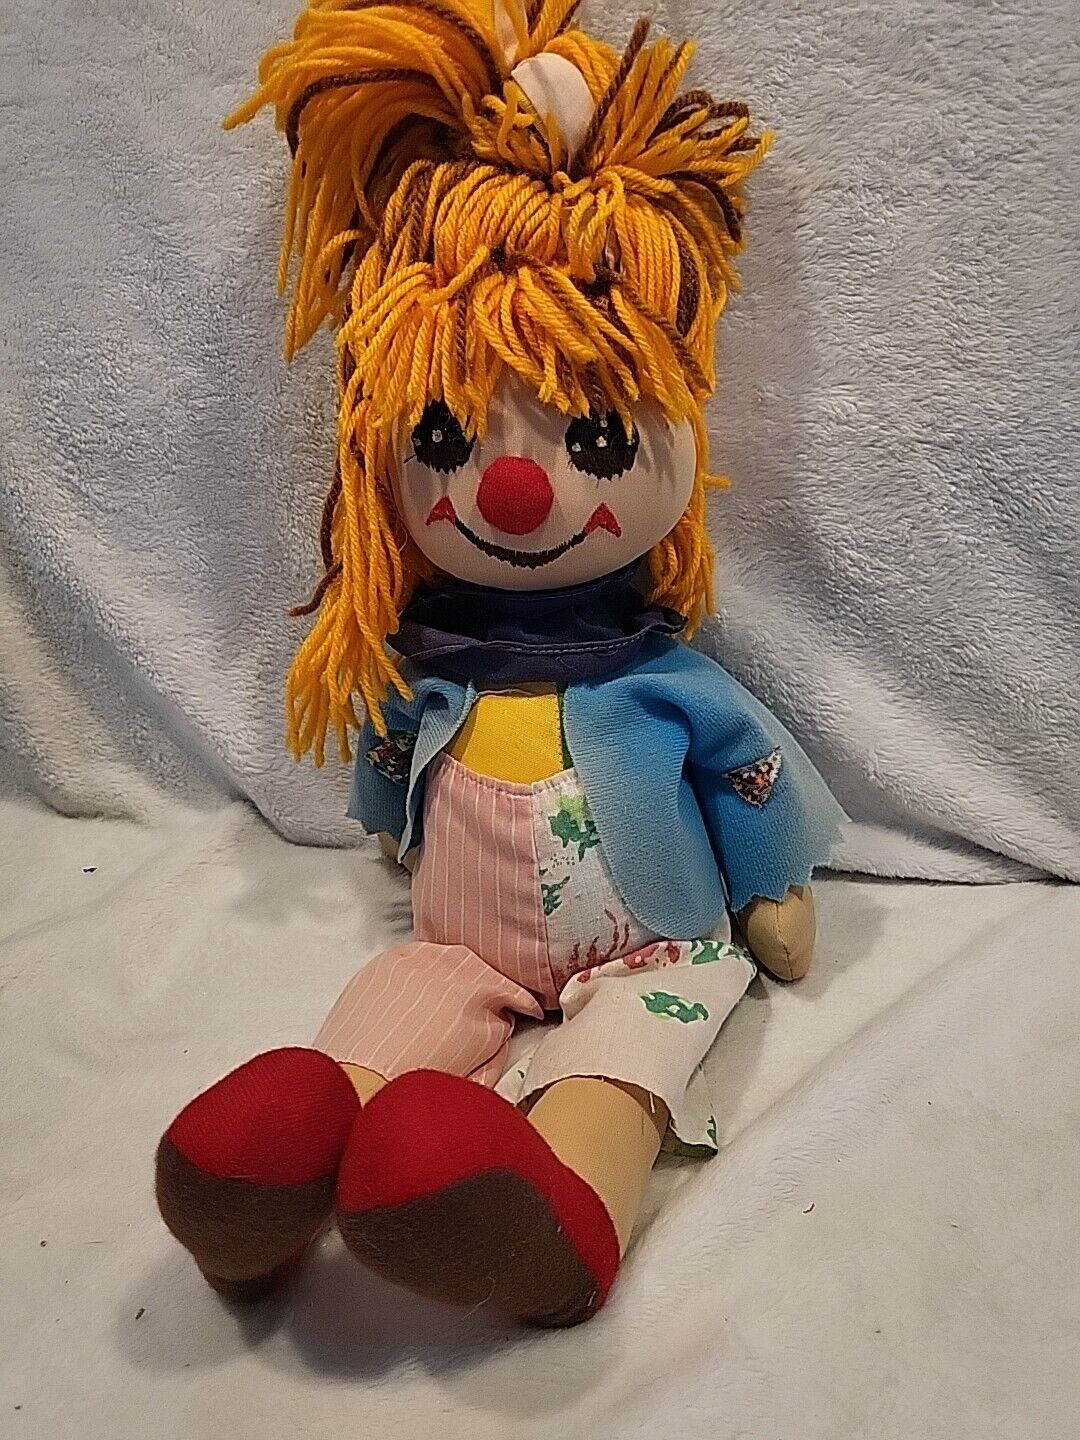 Vintage 1985 KAMAR PEOROTYPE HAND MADE Clown  STYLE  5756 RARE  FIND